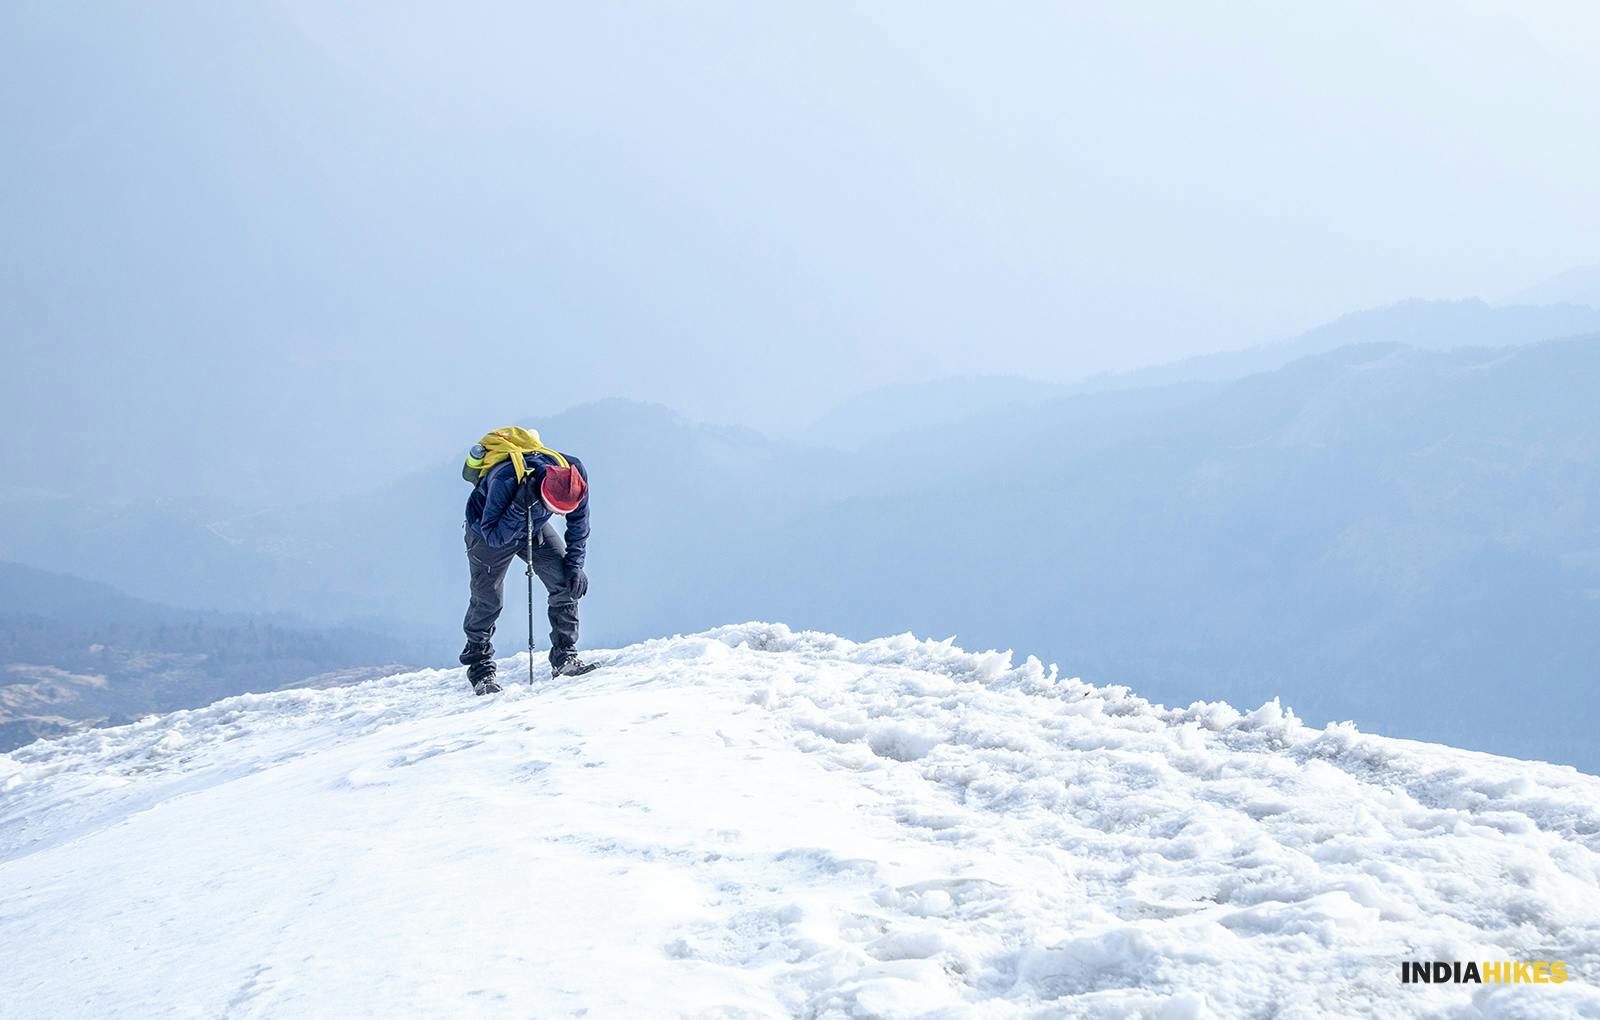 A Beginner's Guide to Get Fit for a High Altitude Trek